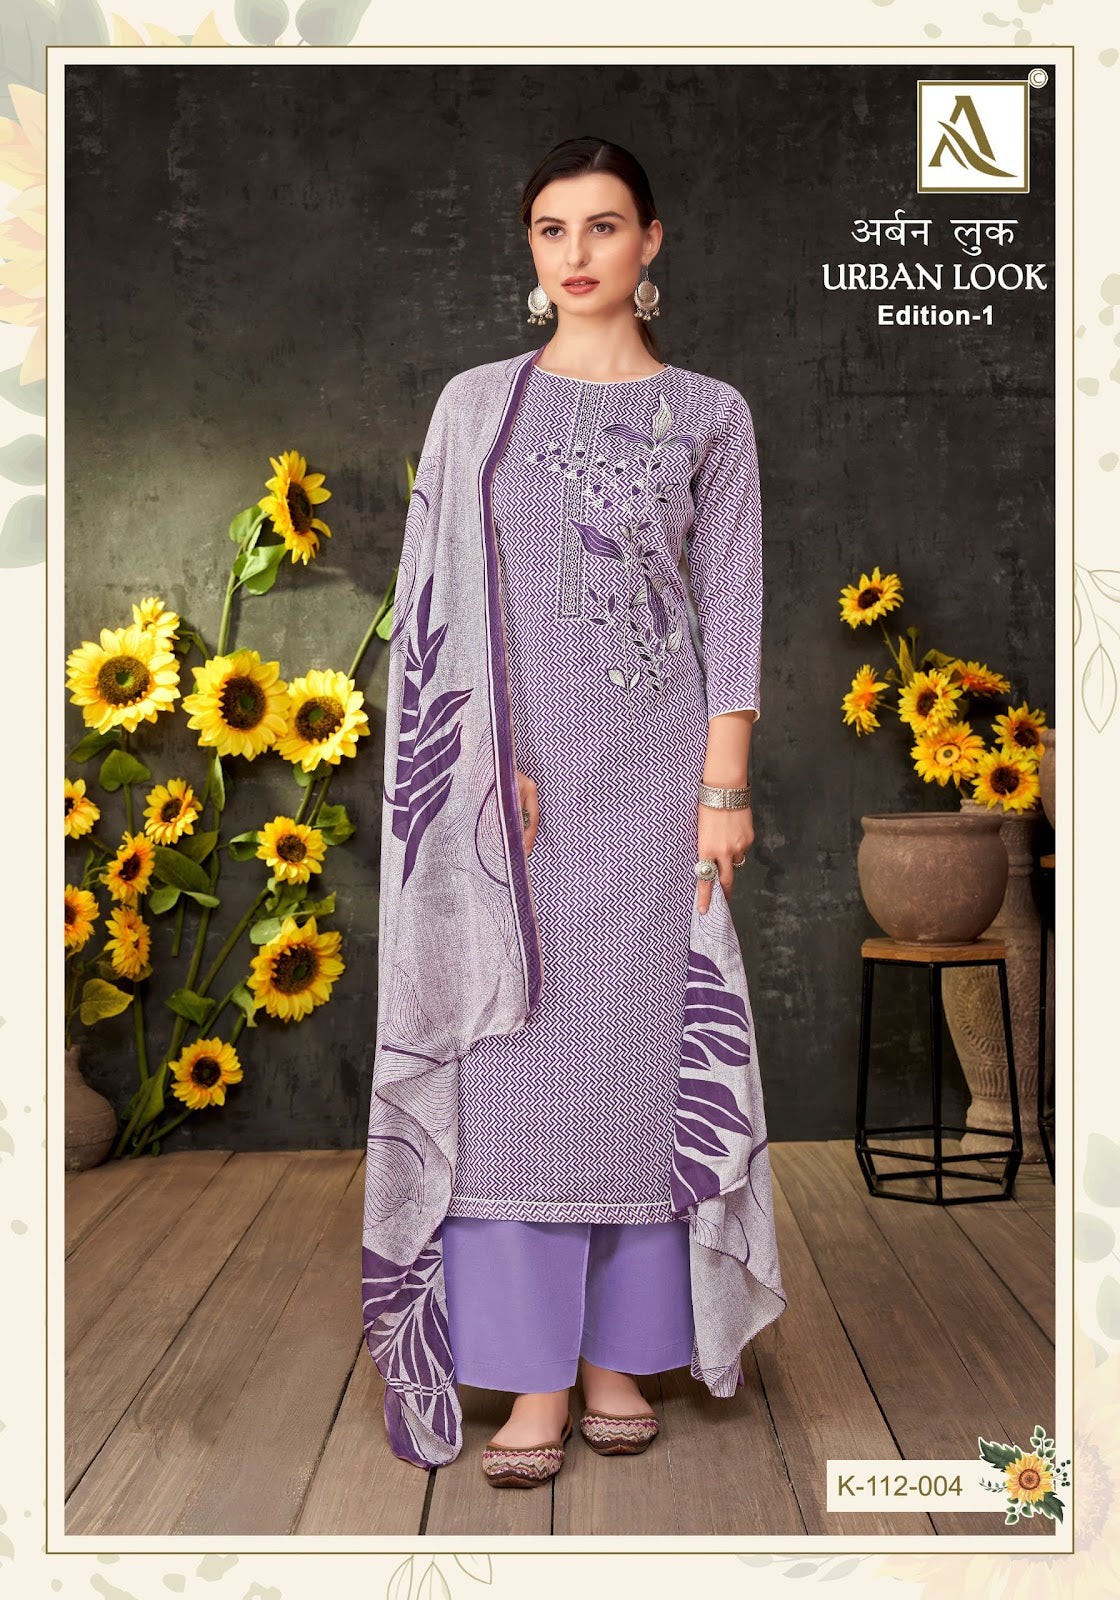 Urban Look Edition 1 Alok Pure Zam Pant Style Suits Manufacturer India